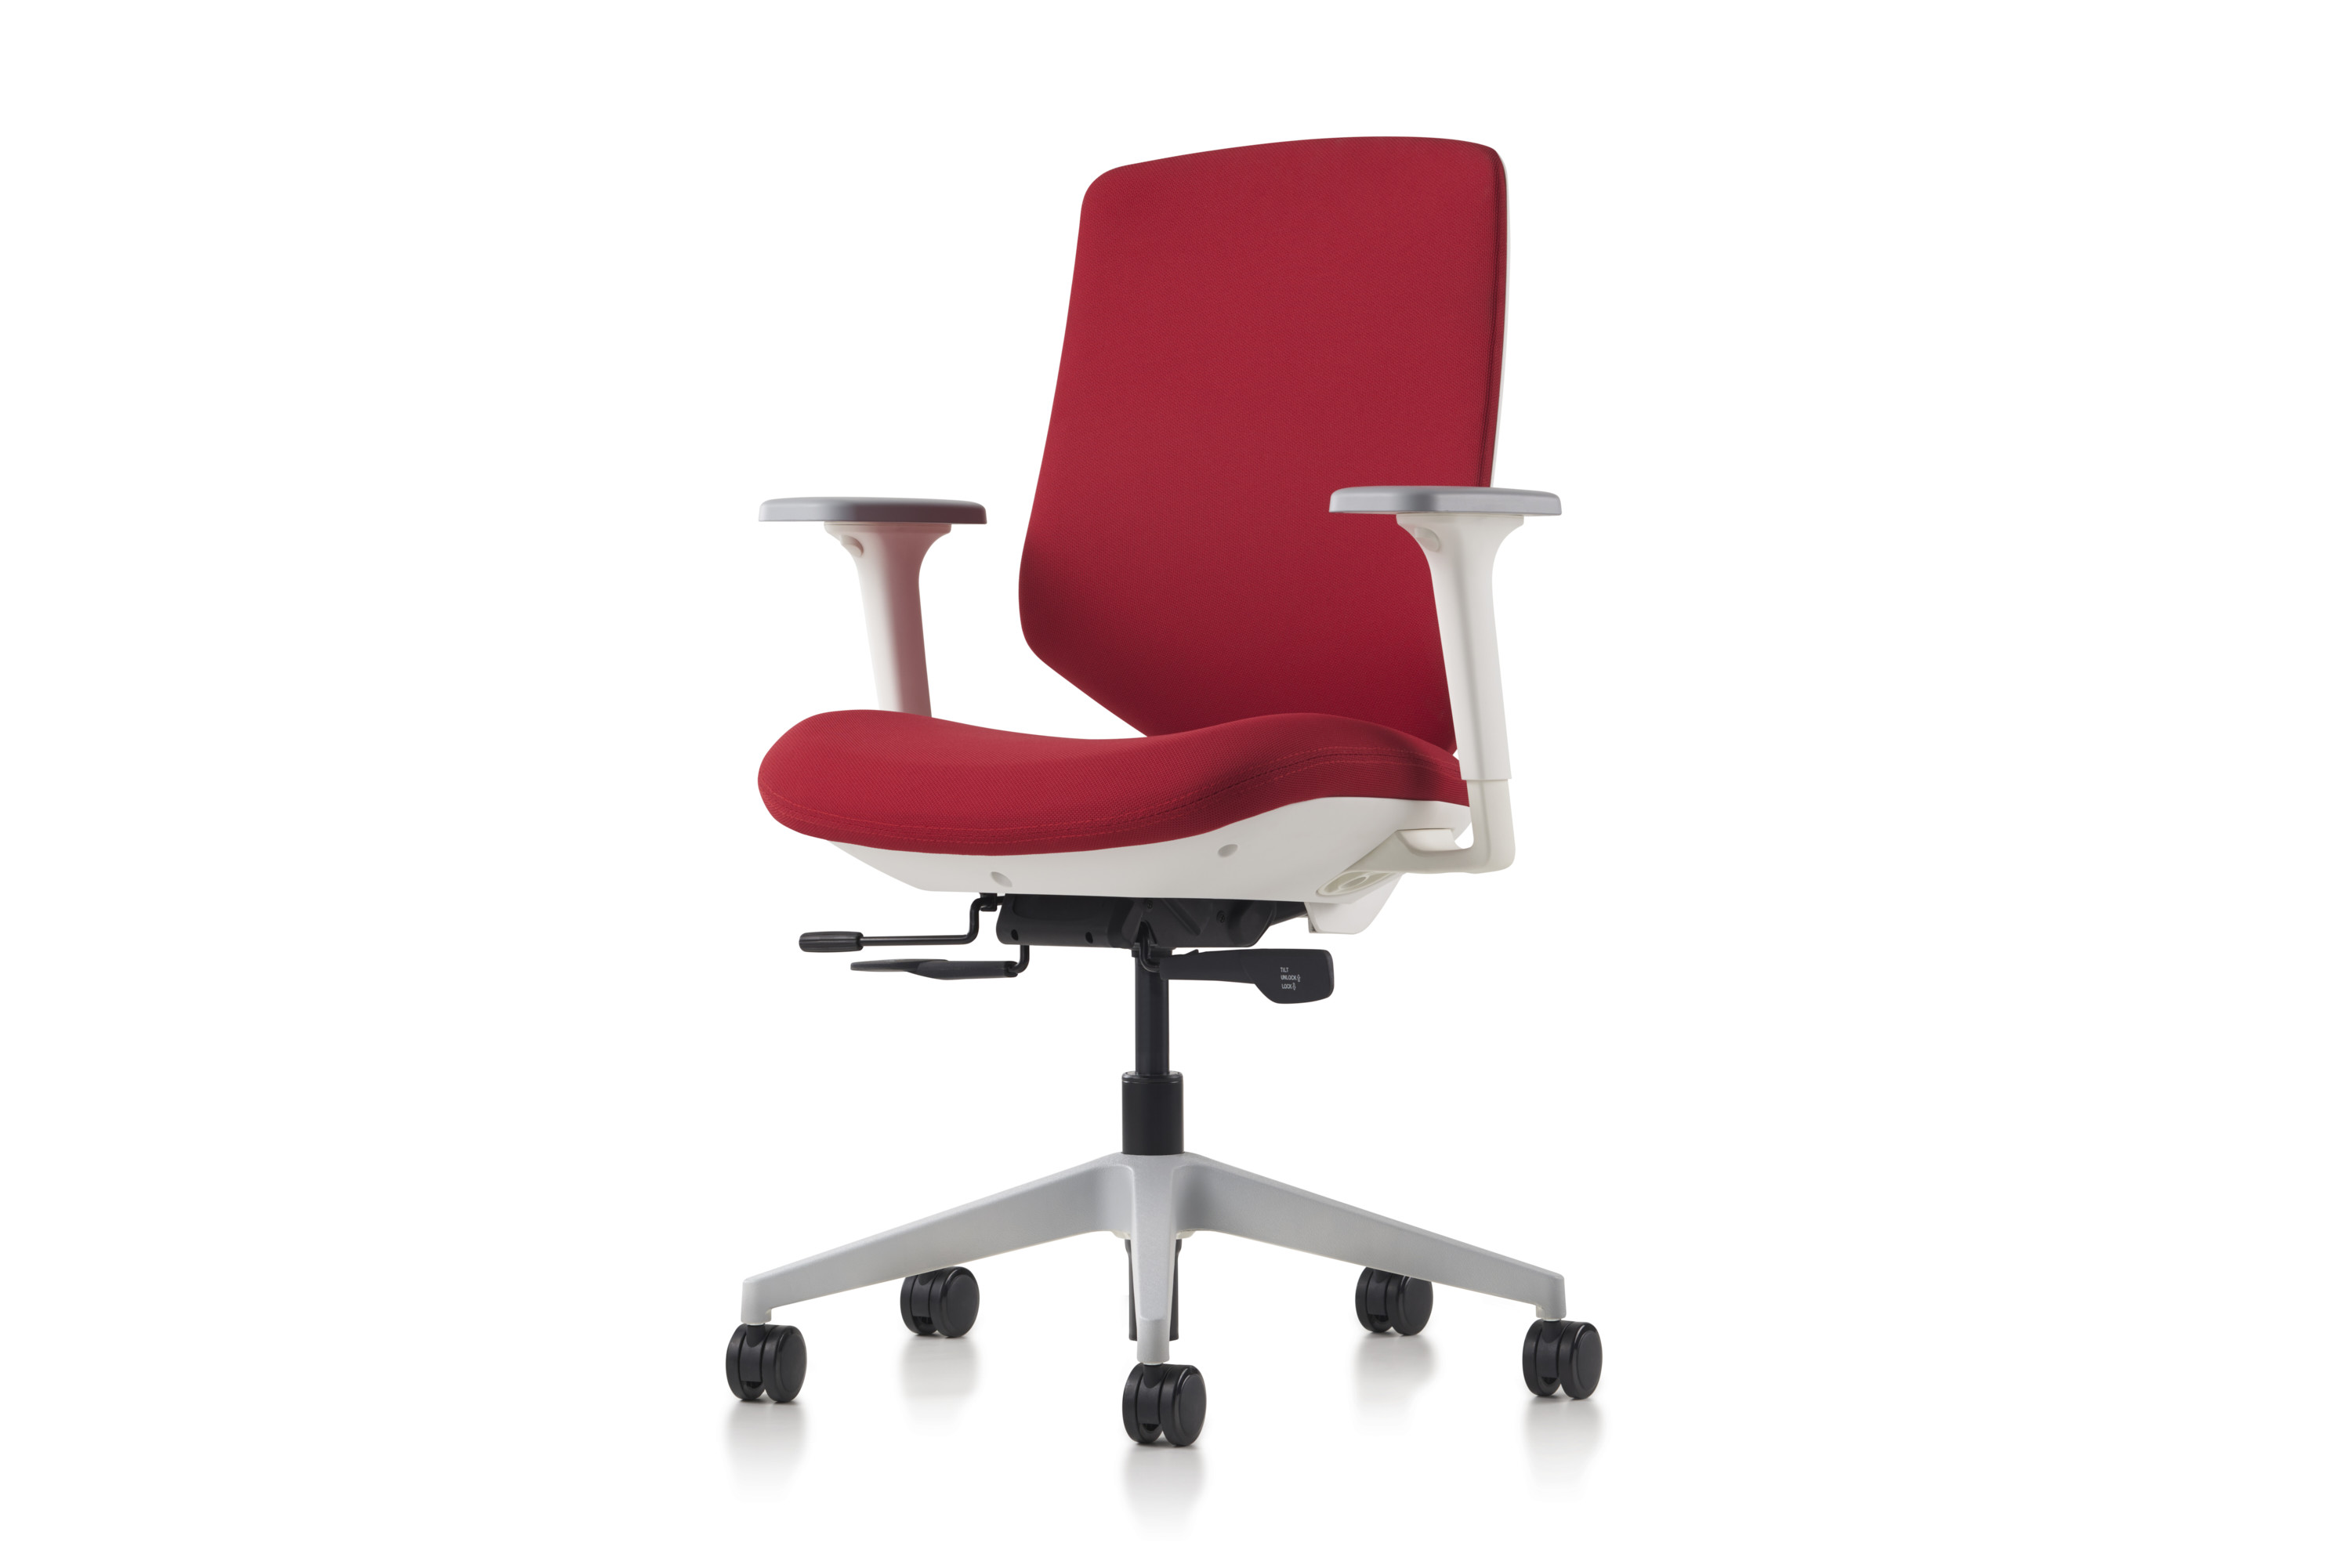 POSH Express 2 Product Images - Office Chairs - Herman Miller